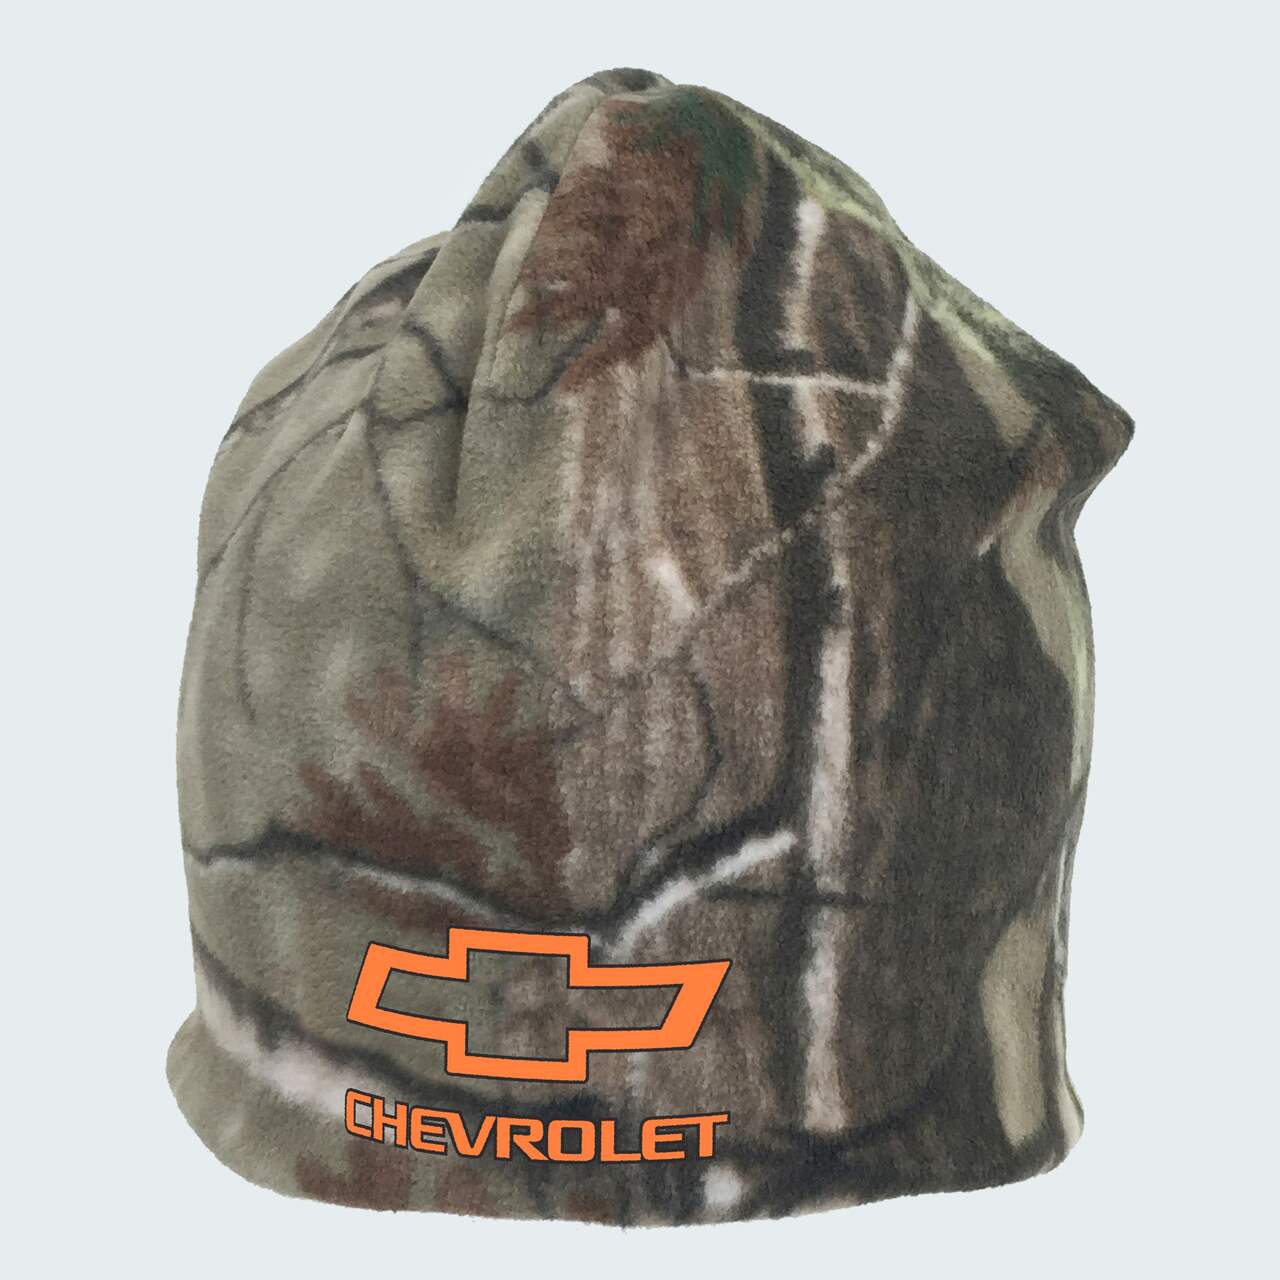 Reversible Warm Fleece Toque for Hunting/Fishing/Hiking, One Size